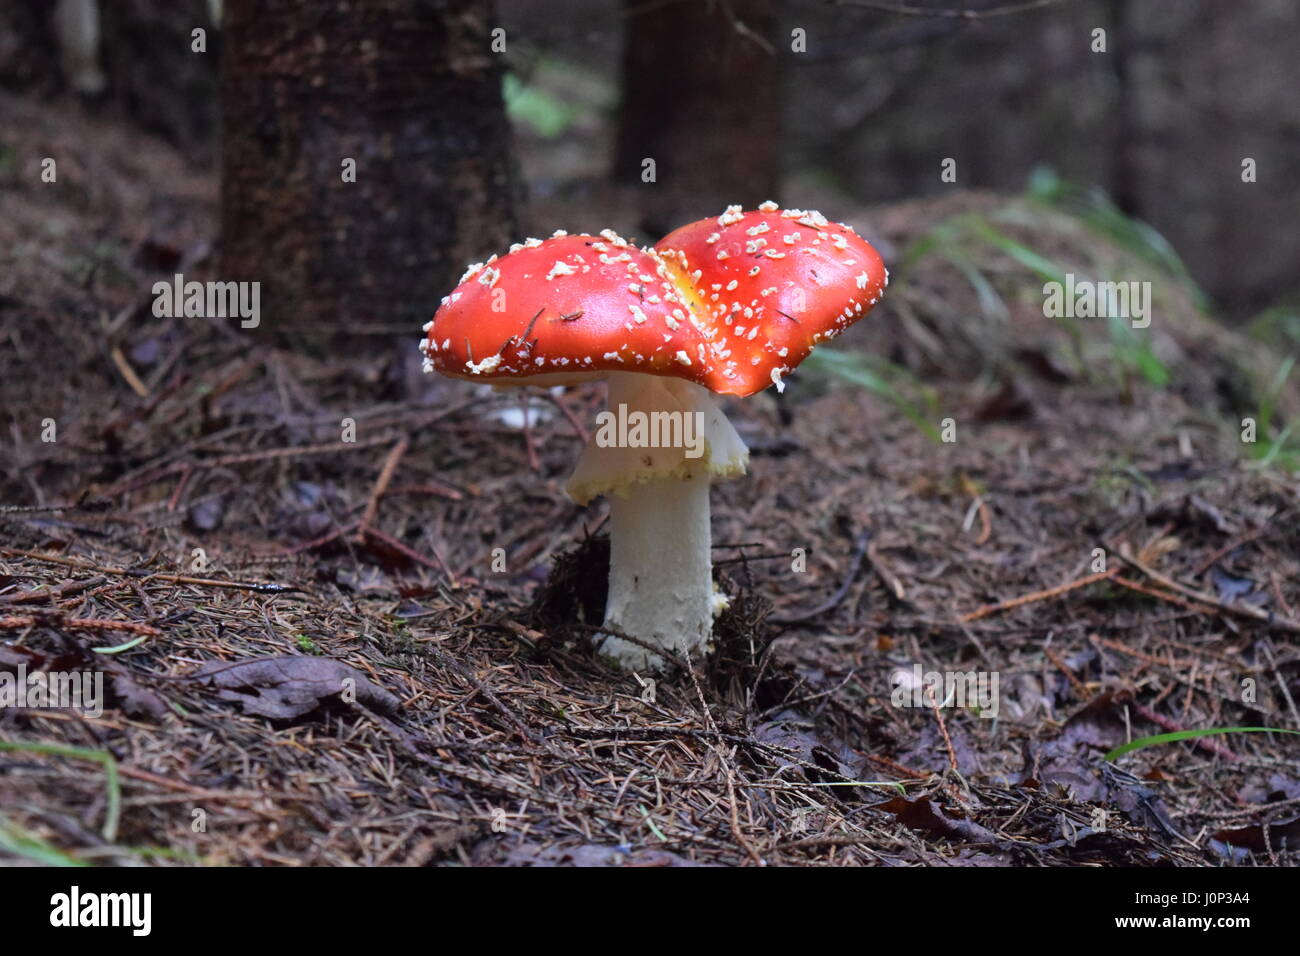 Amanita muscaria red mushroom deep in the carpathian forest Stock Photo